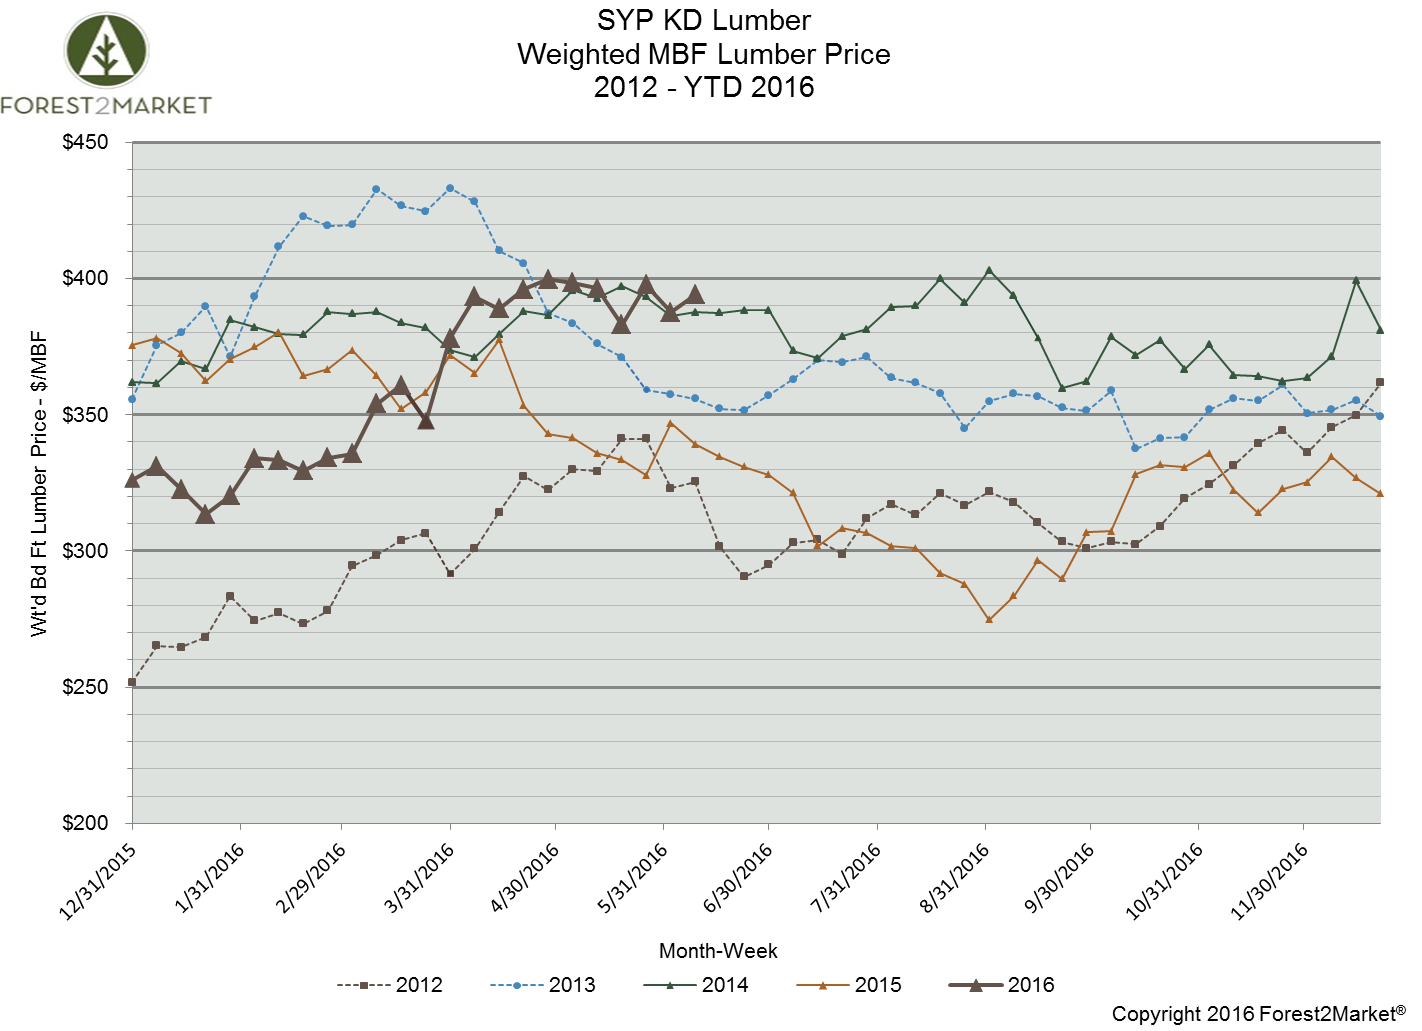 Housing Starts Flatten, Southern Yellow Pine Prices Remain High